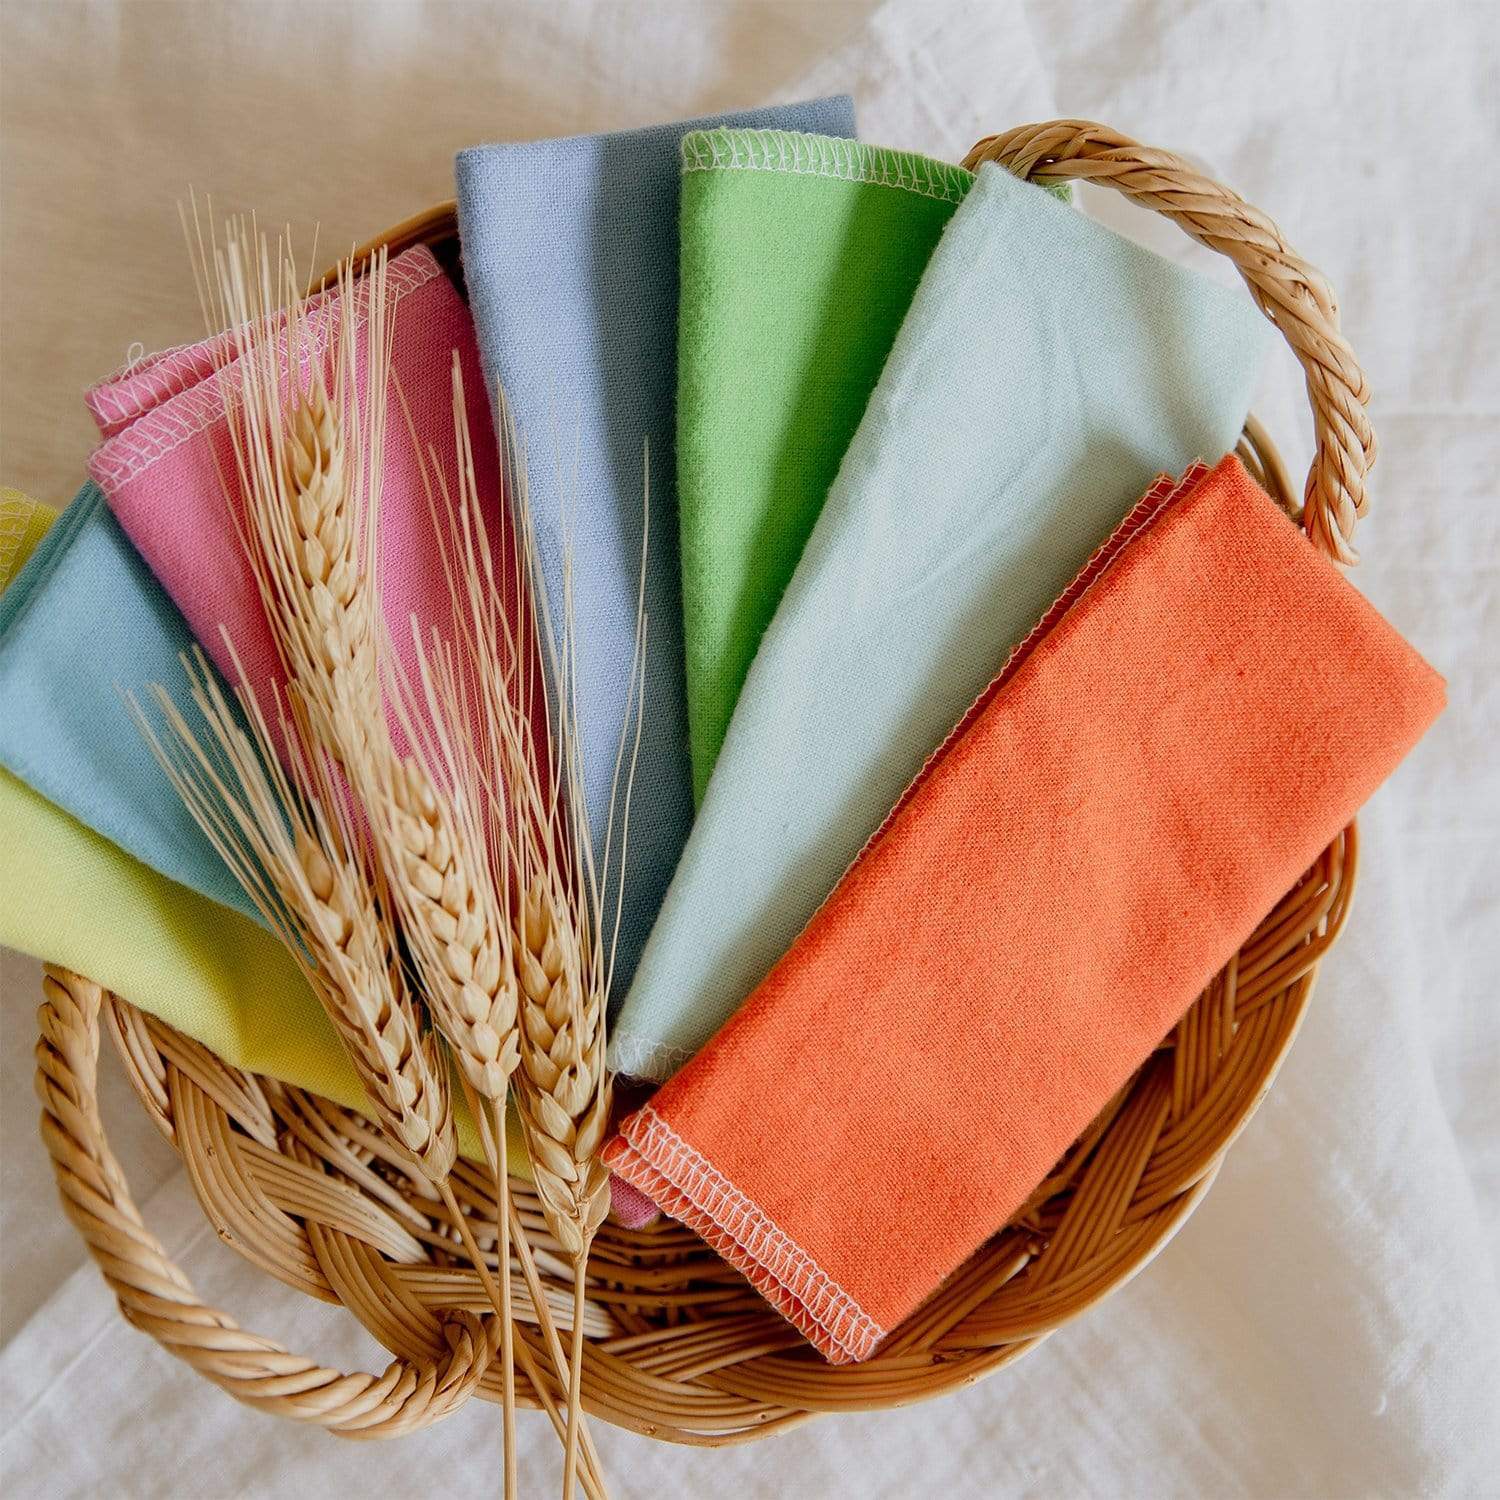 Multi-colored unpaper towels folded and placed in a woven basket